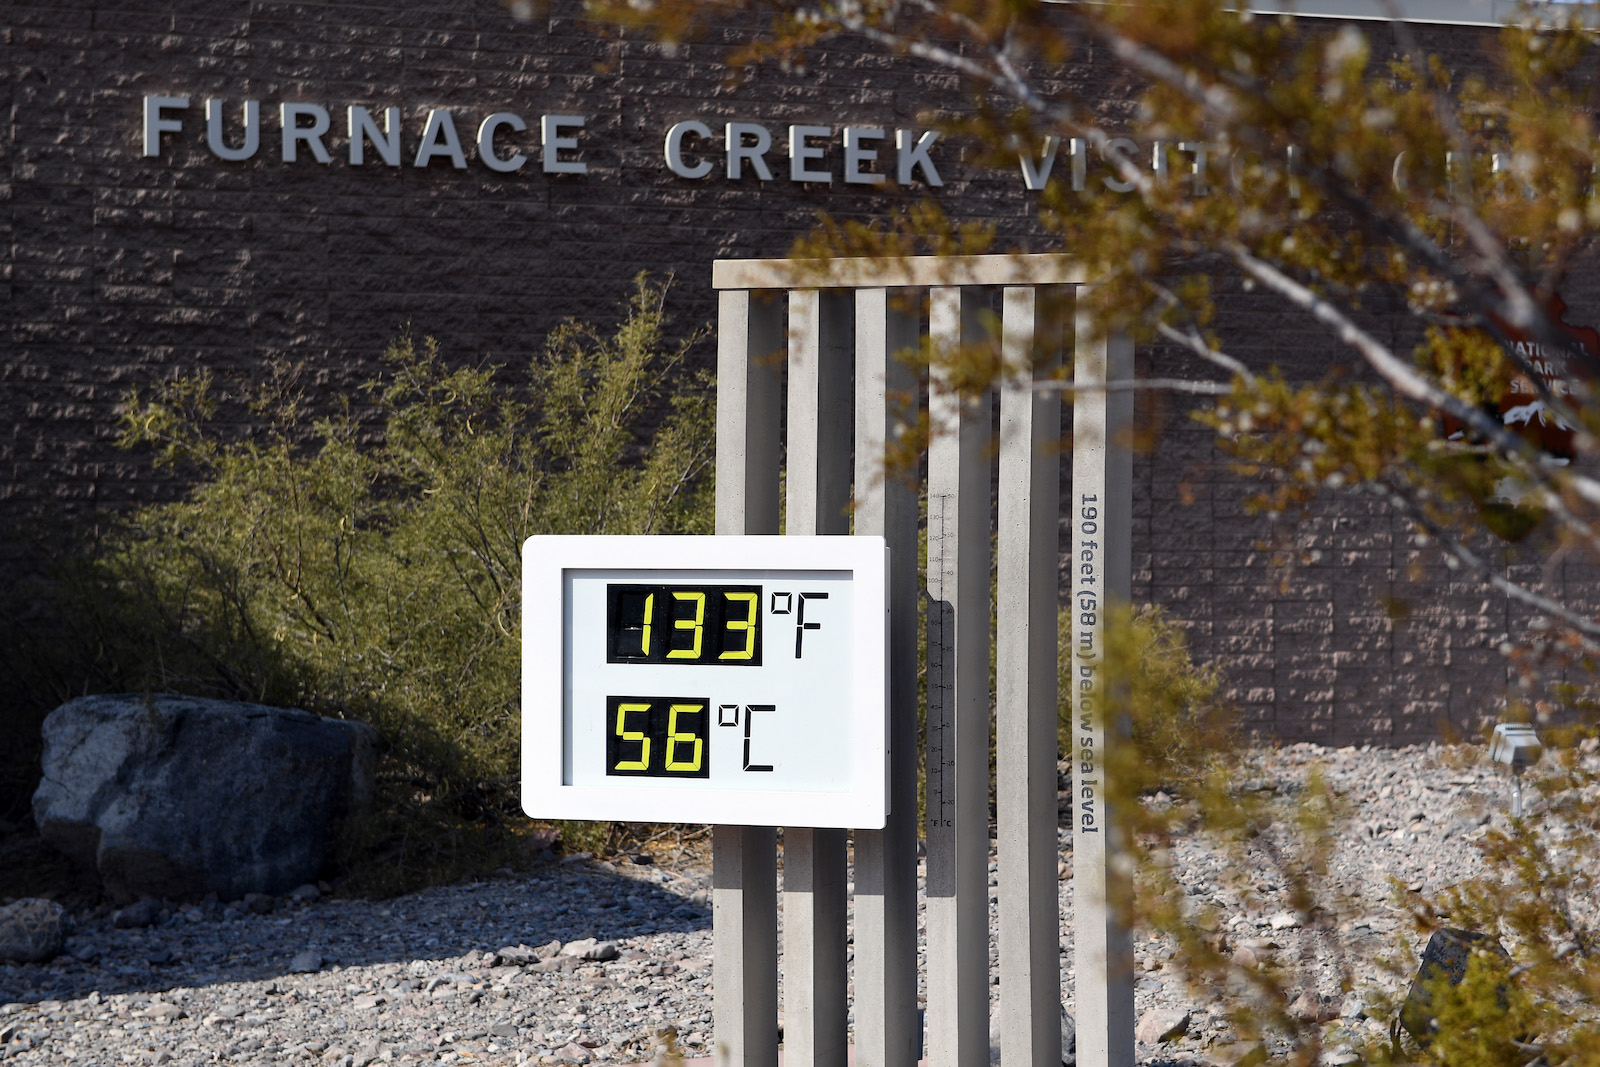 Photo: A sign showing a temperature of 133F in Death Valley, CA.